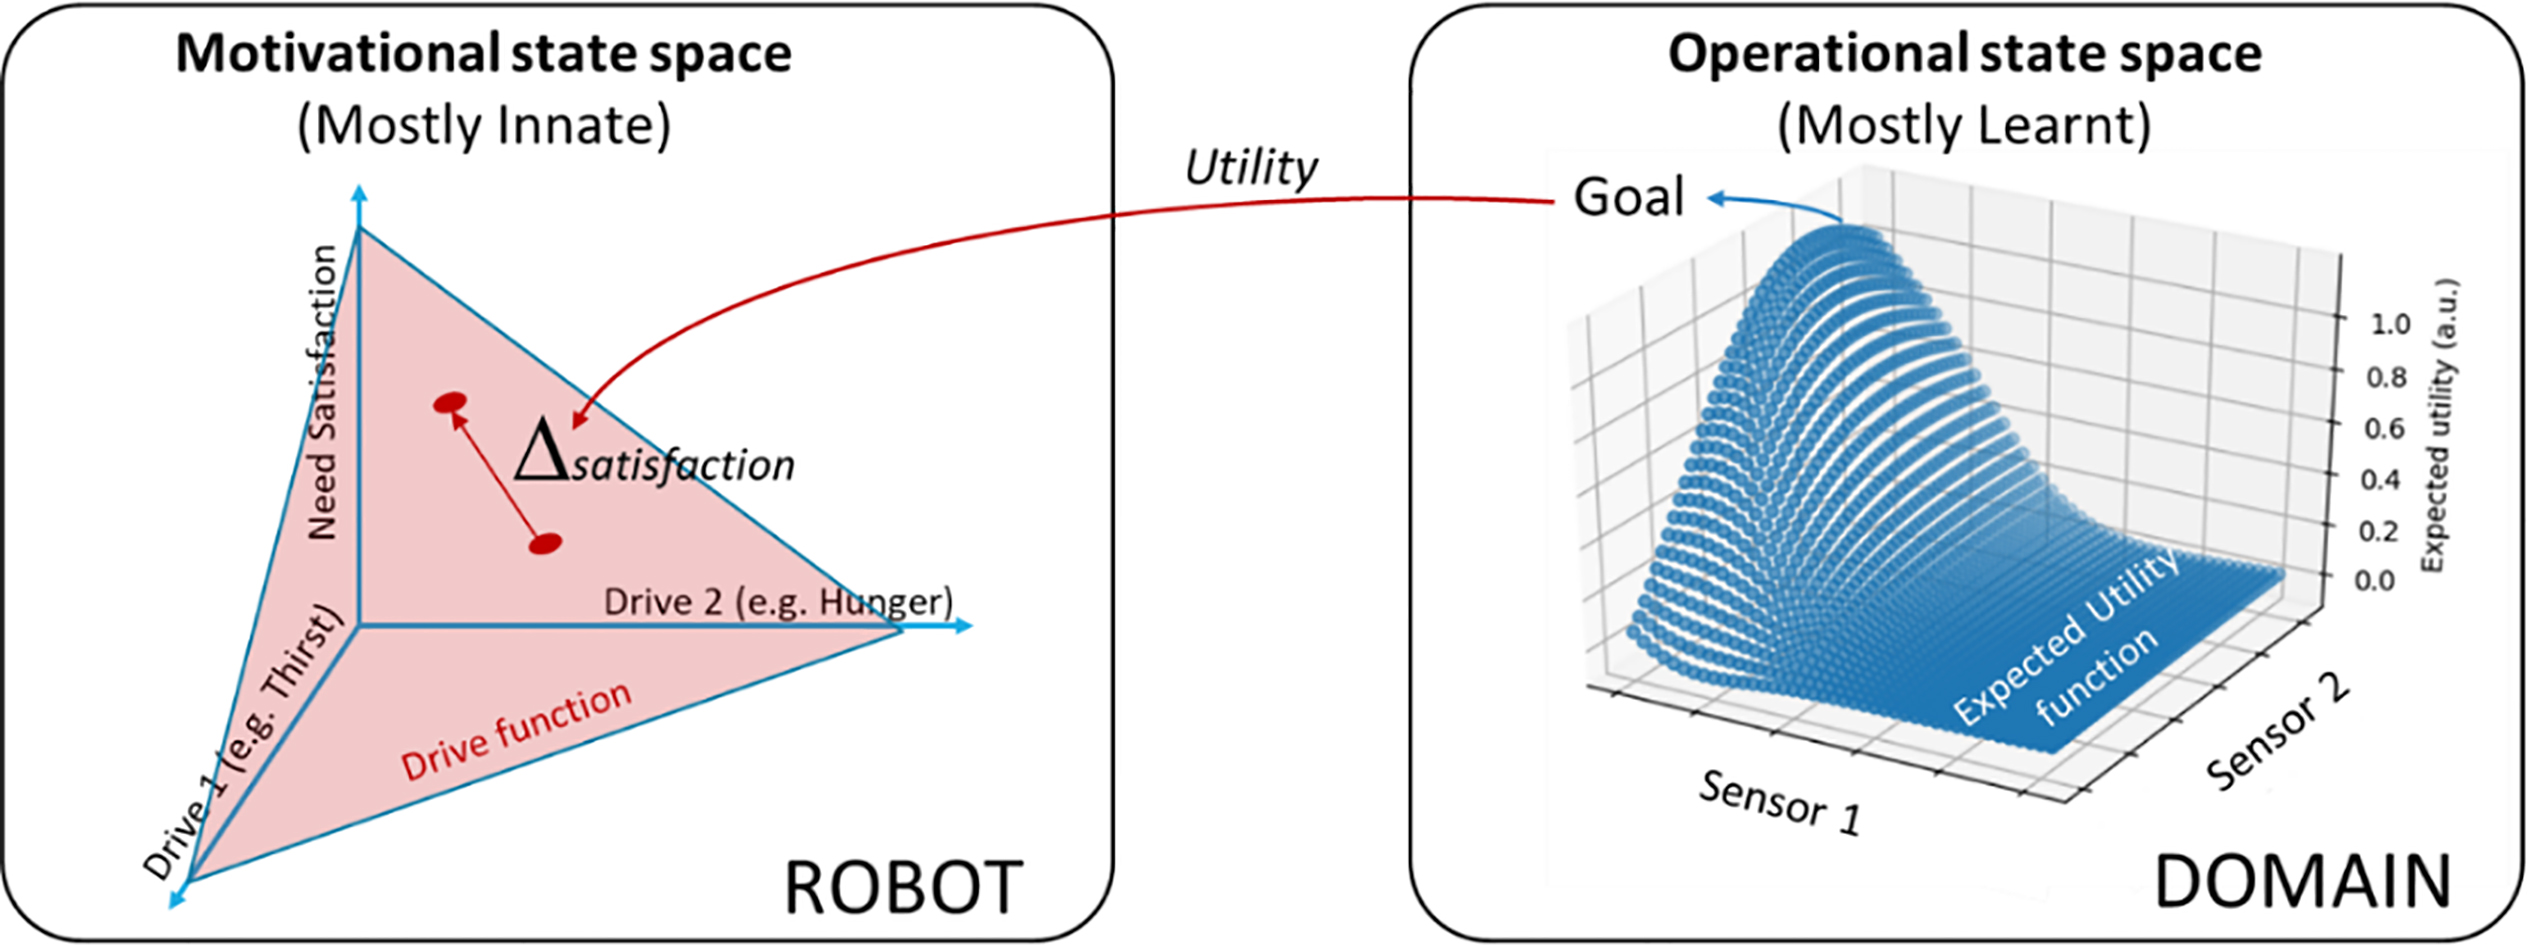 Diagram showing the relationship between motivational and operational state space. Left: Motivational state space is domain independent and constructed from a series of designer provided drives through drive functions that relate them to the satisfaction of their associated needs. A robot always seeks to satisfy needs. Right: From a robot perspective, each domain implies an Operational state space in which some points (goal points) provide utility, which imply increase in need satisfaction. These goals must be found and to be able to consistently reach them, the robot must generate and store an Expected Utility function leading to each goal.